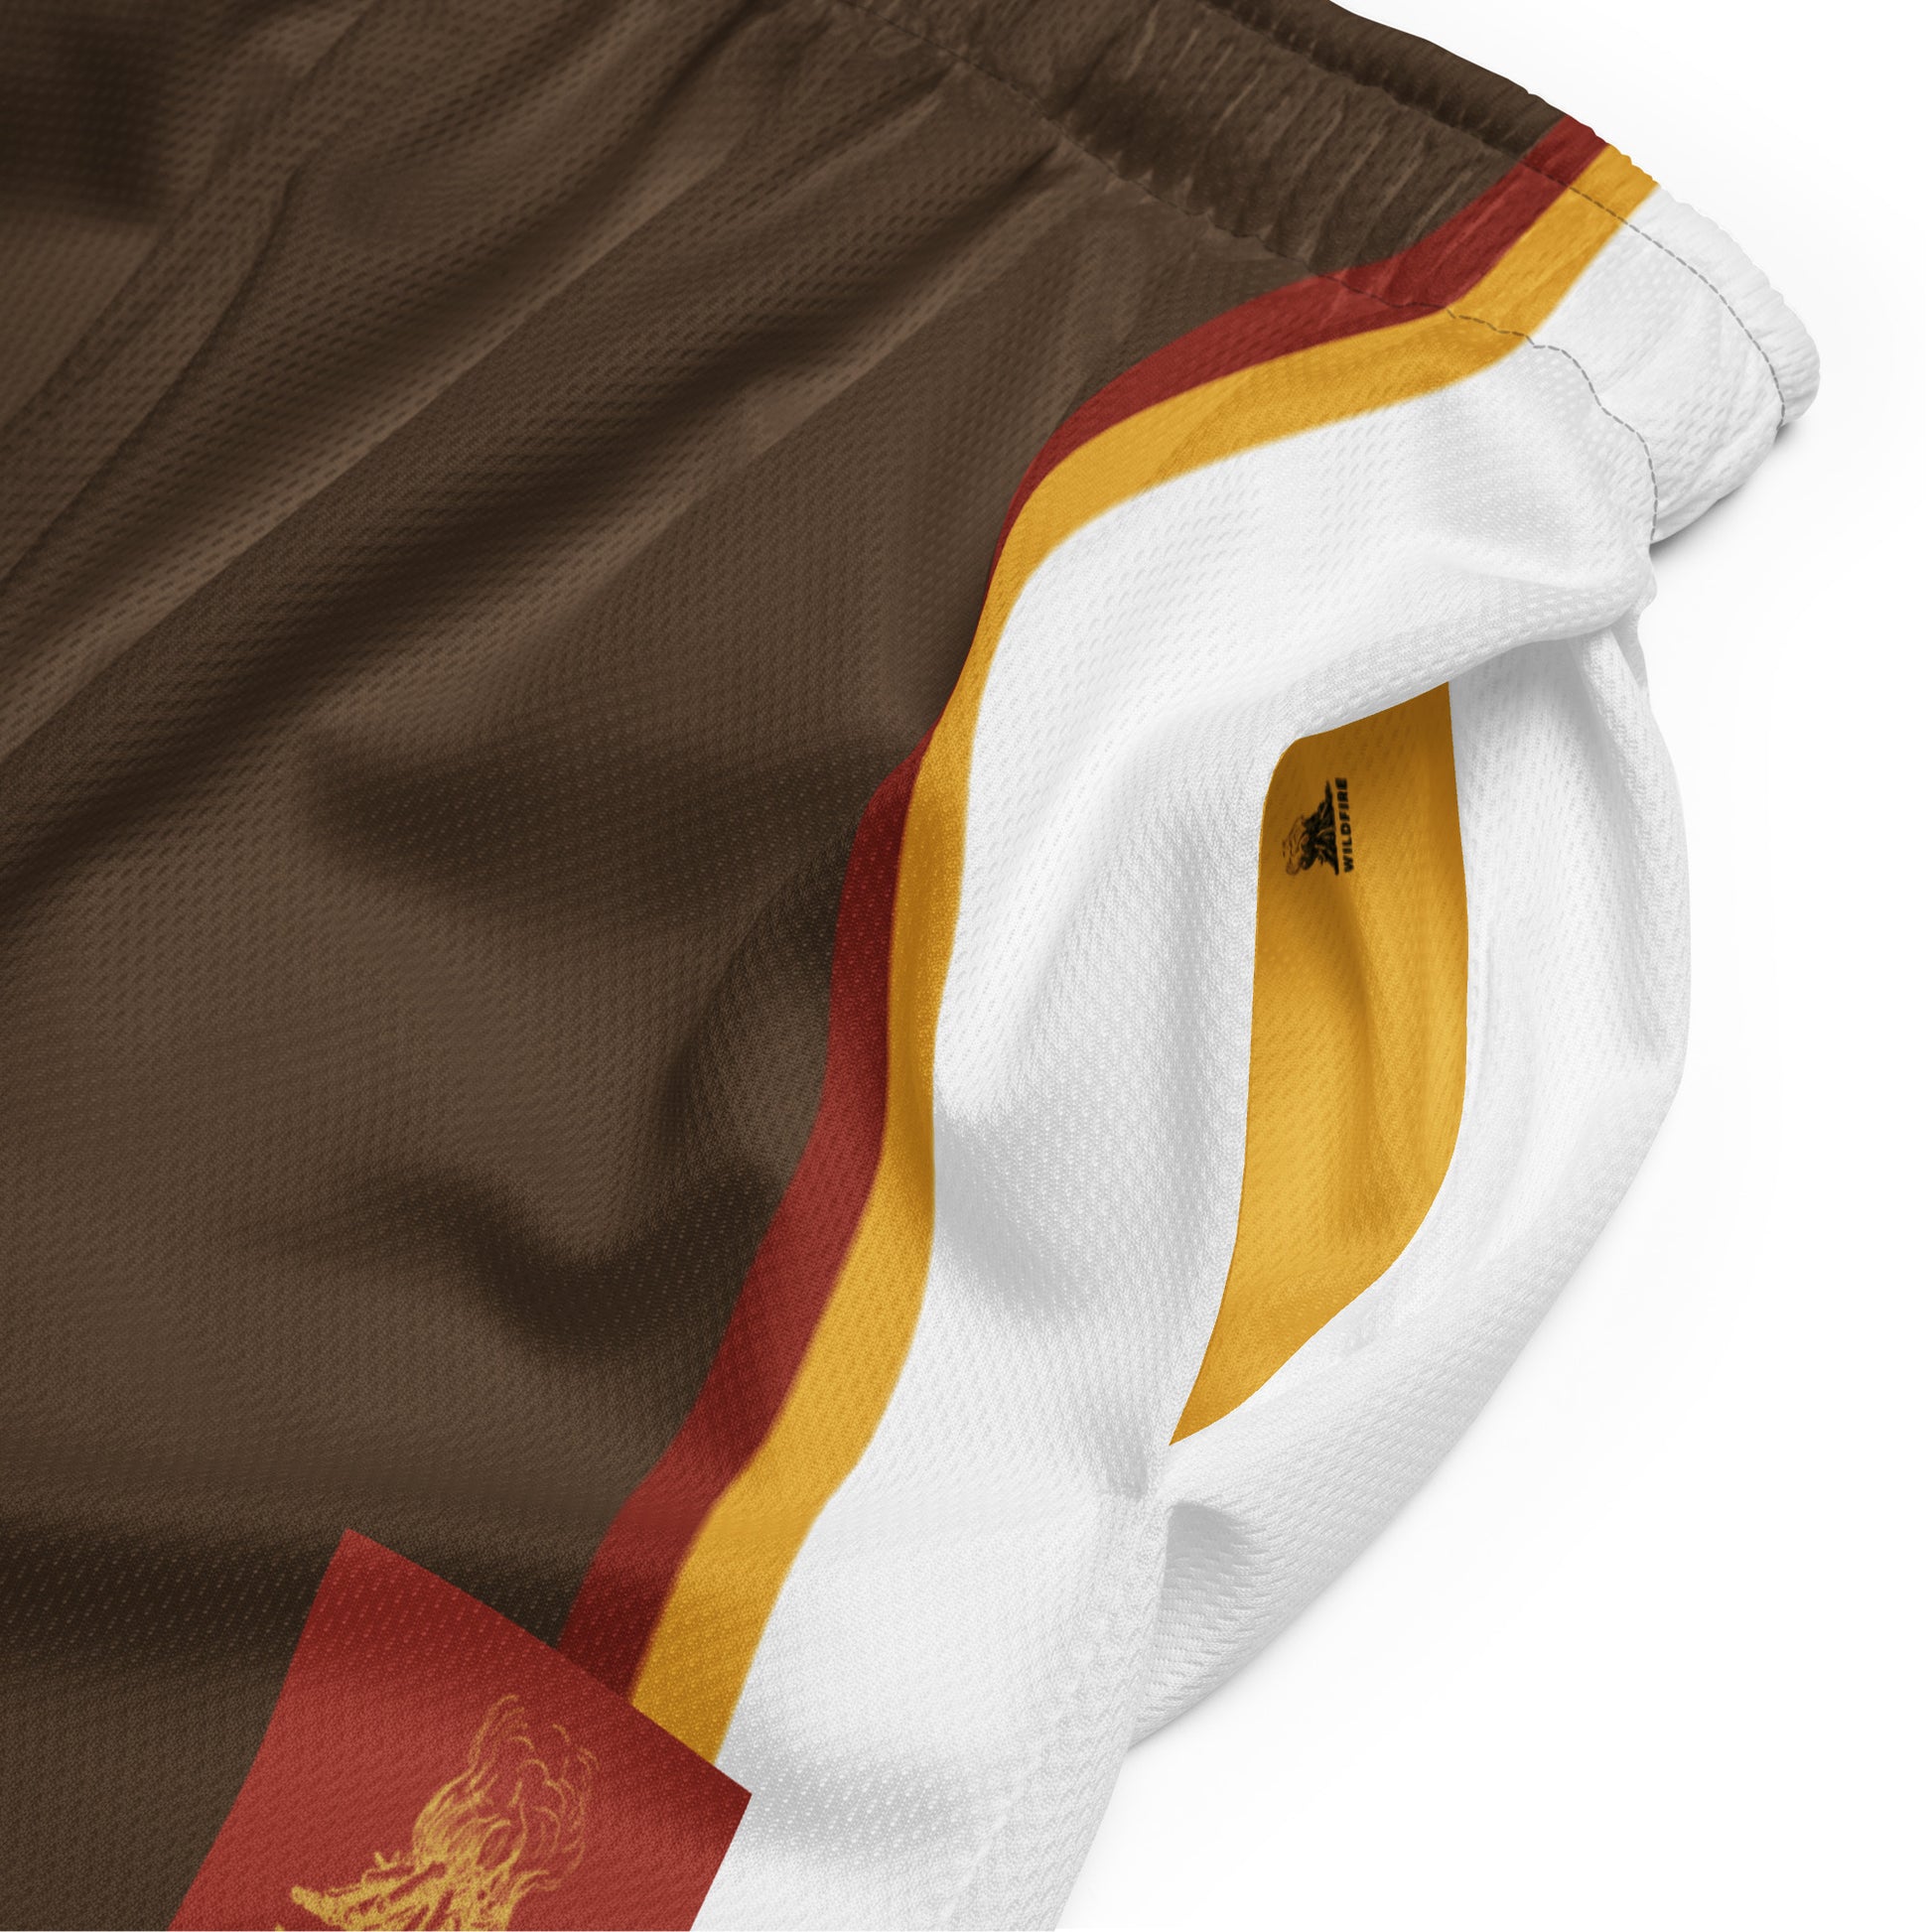 Wildfire Cigars mesh shorts in brown red gold and white